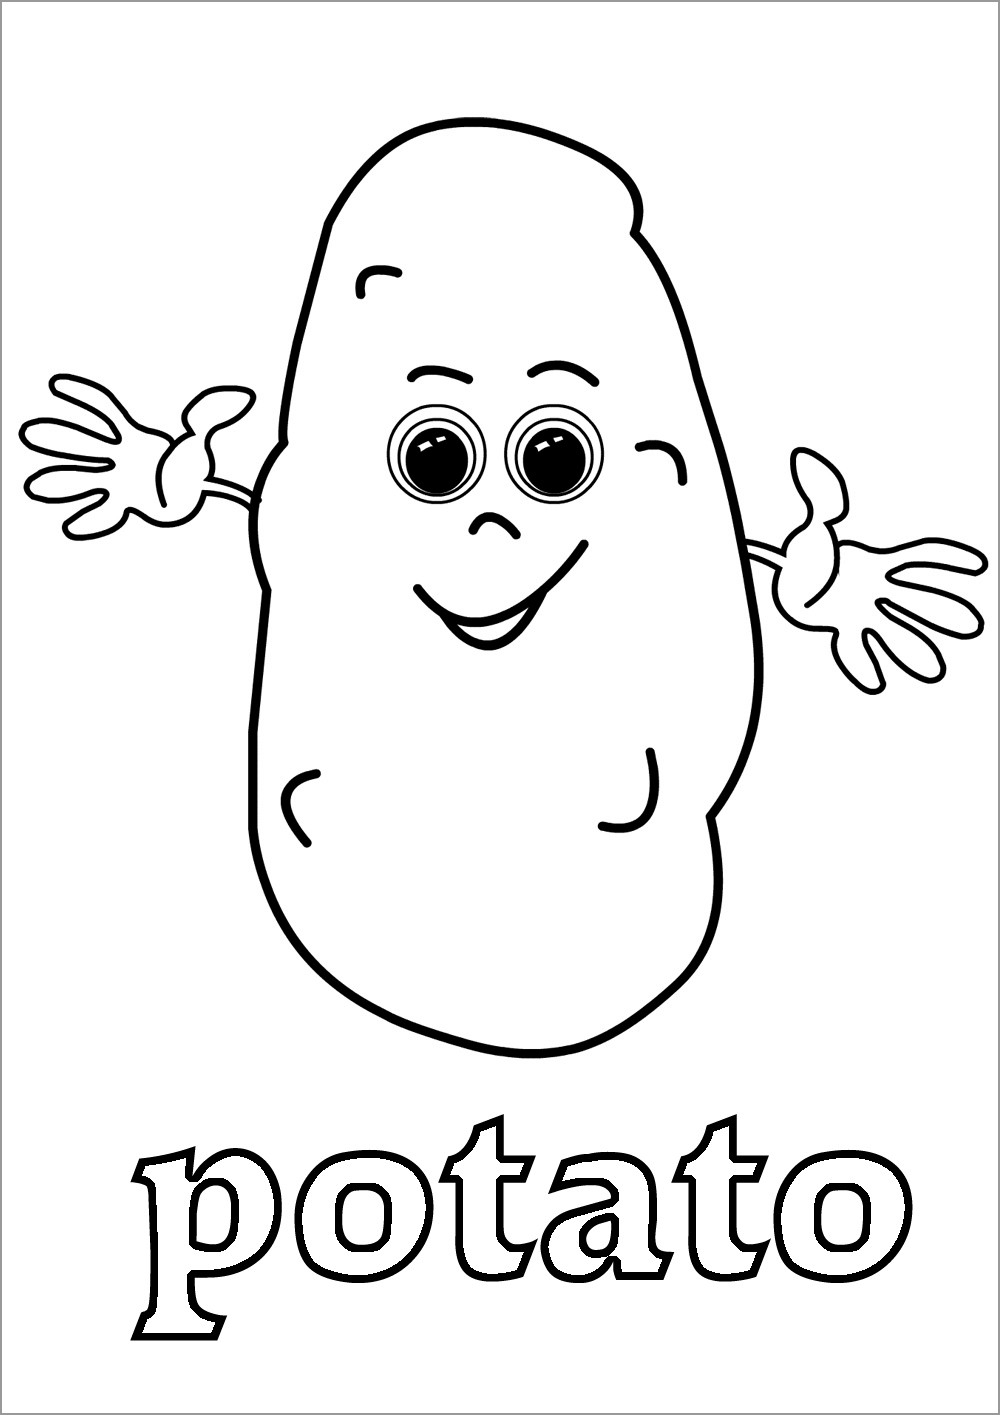 Potato Coloring Page Cartoon Potatoes Coloring Page For Kids Coloringbay